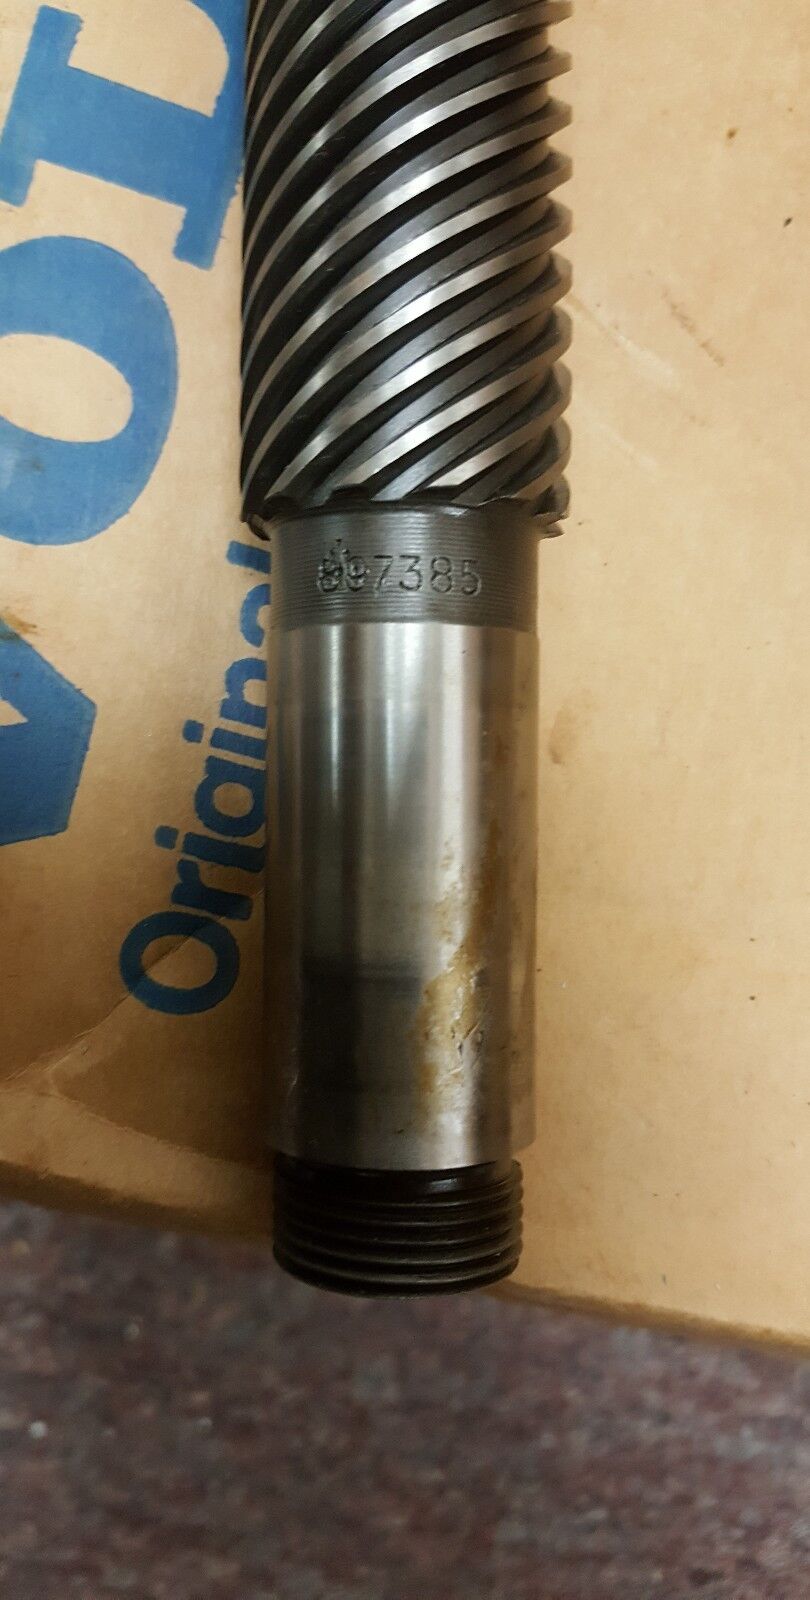 Volvo Penta Drive Shaft For Cone Clutch # 897385 USED